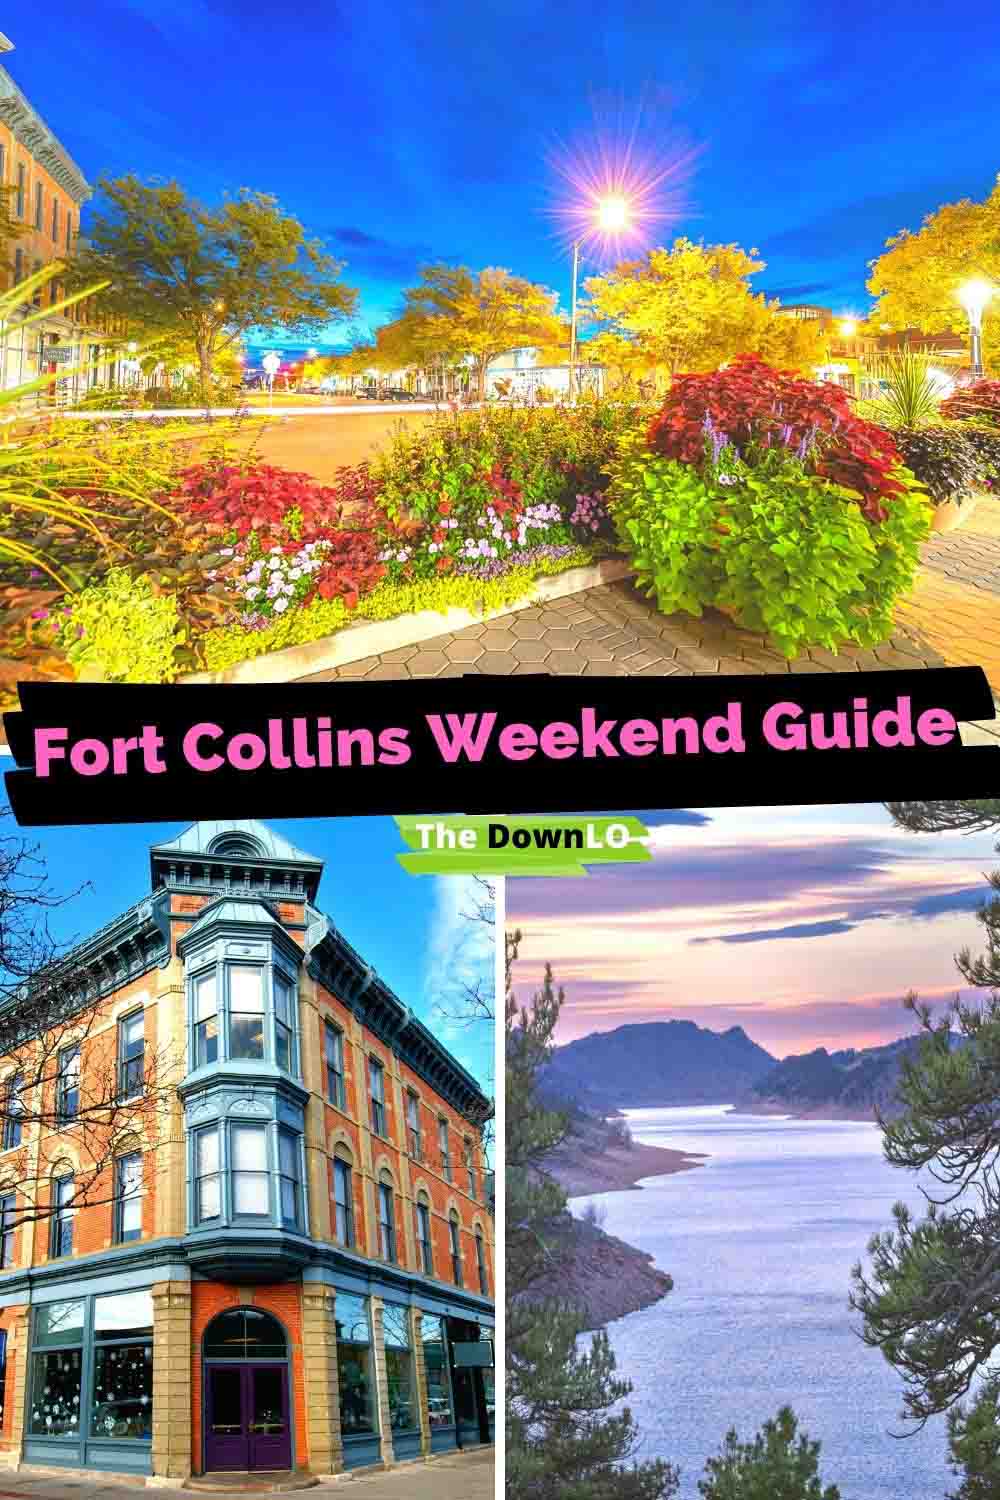 Epically Awesome Things to do in Fort Collins, Colorado